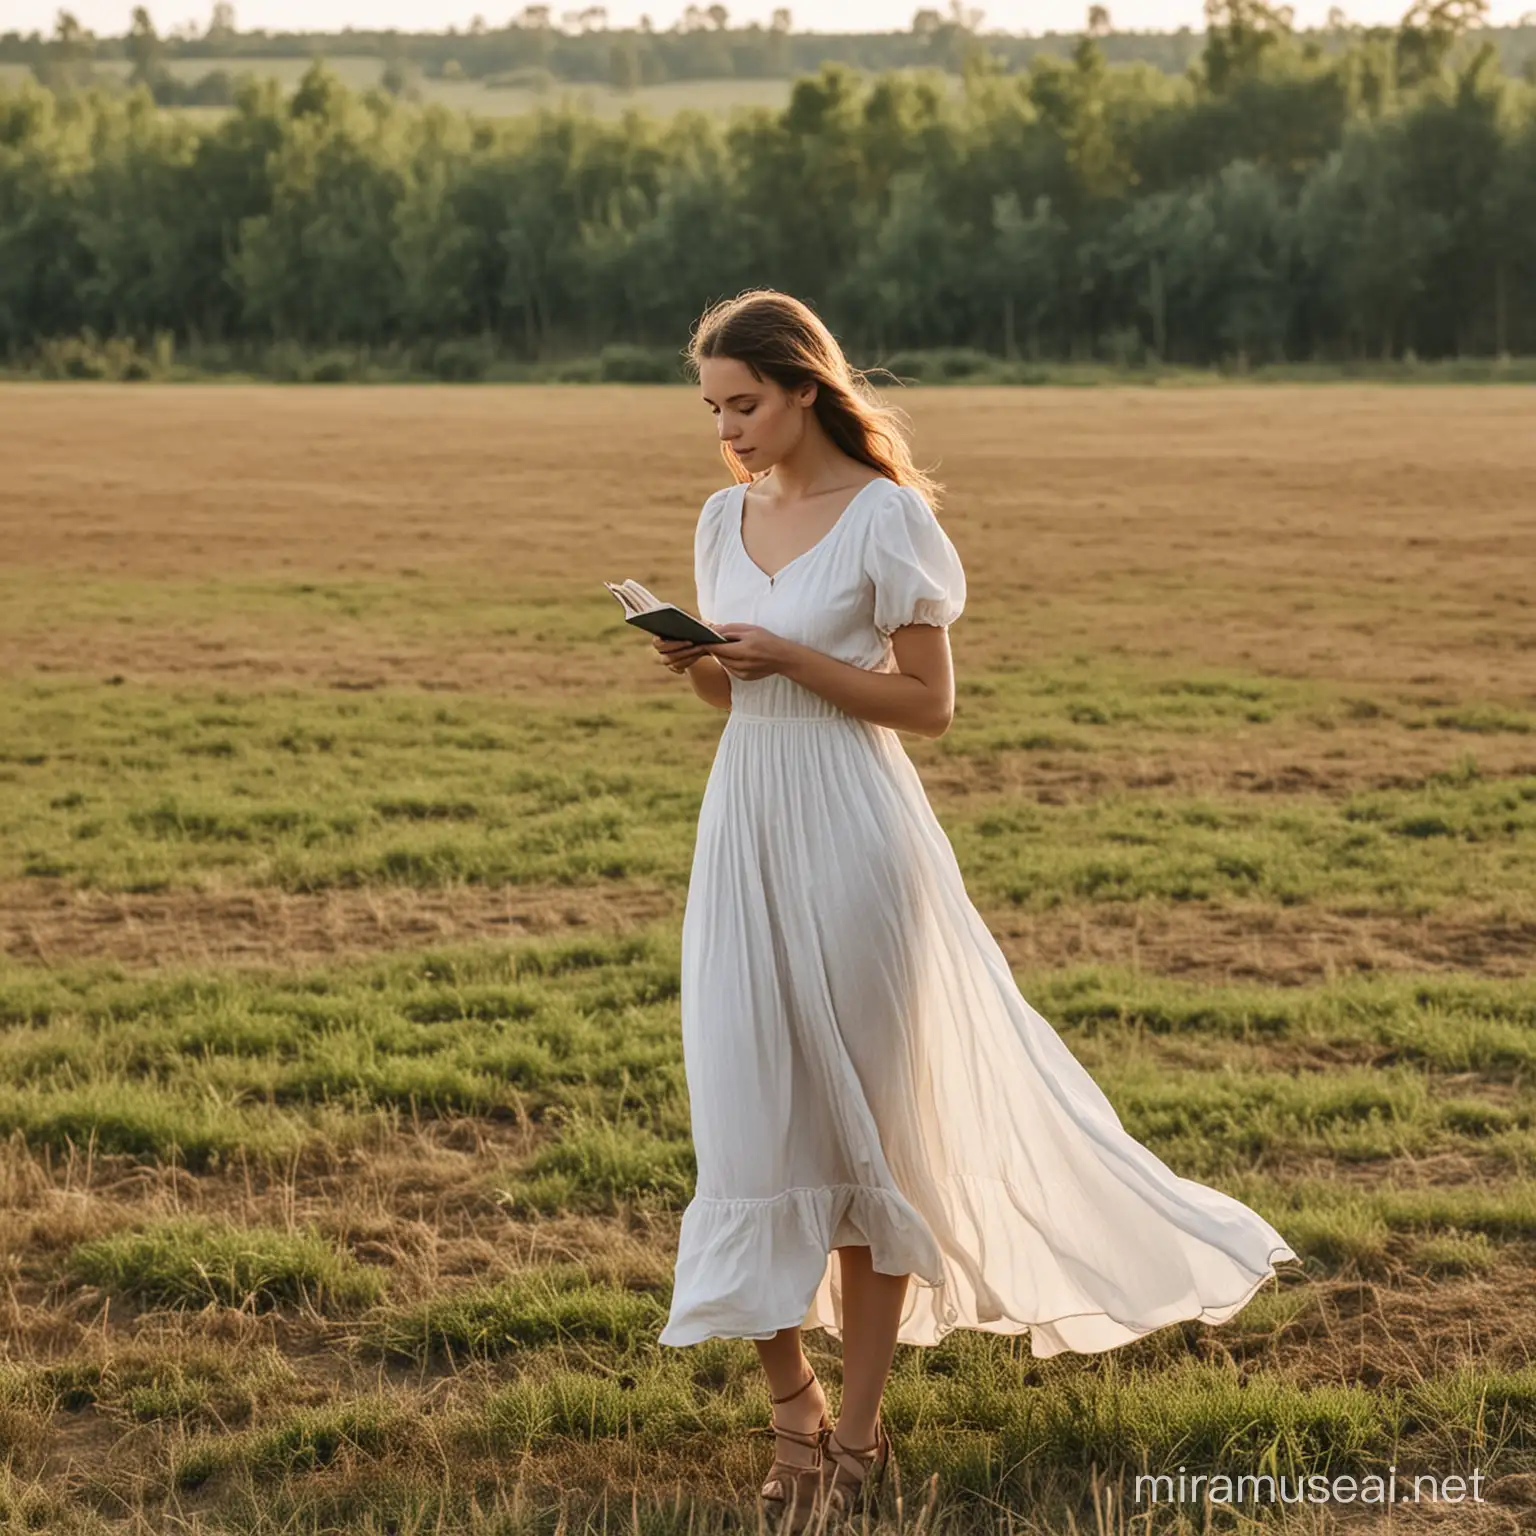 Girl in a Simple Light Dress Working on the Field